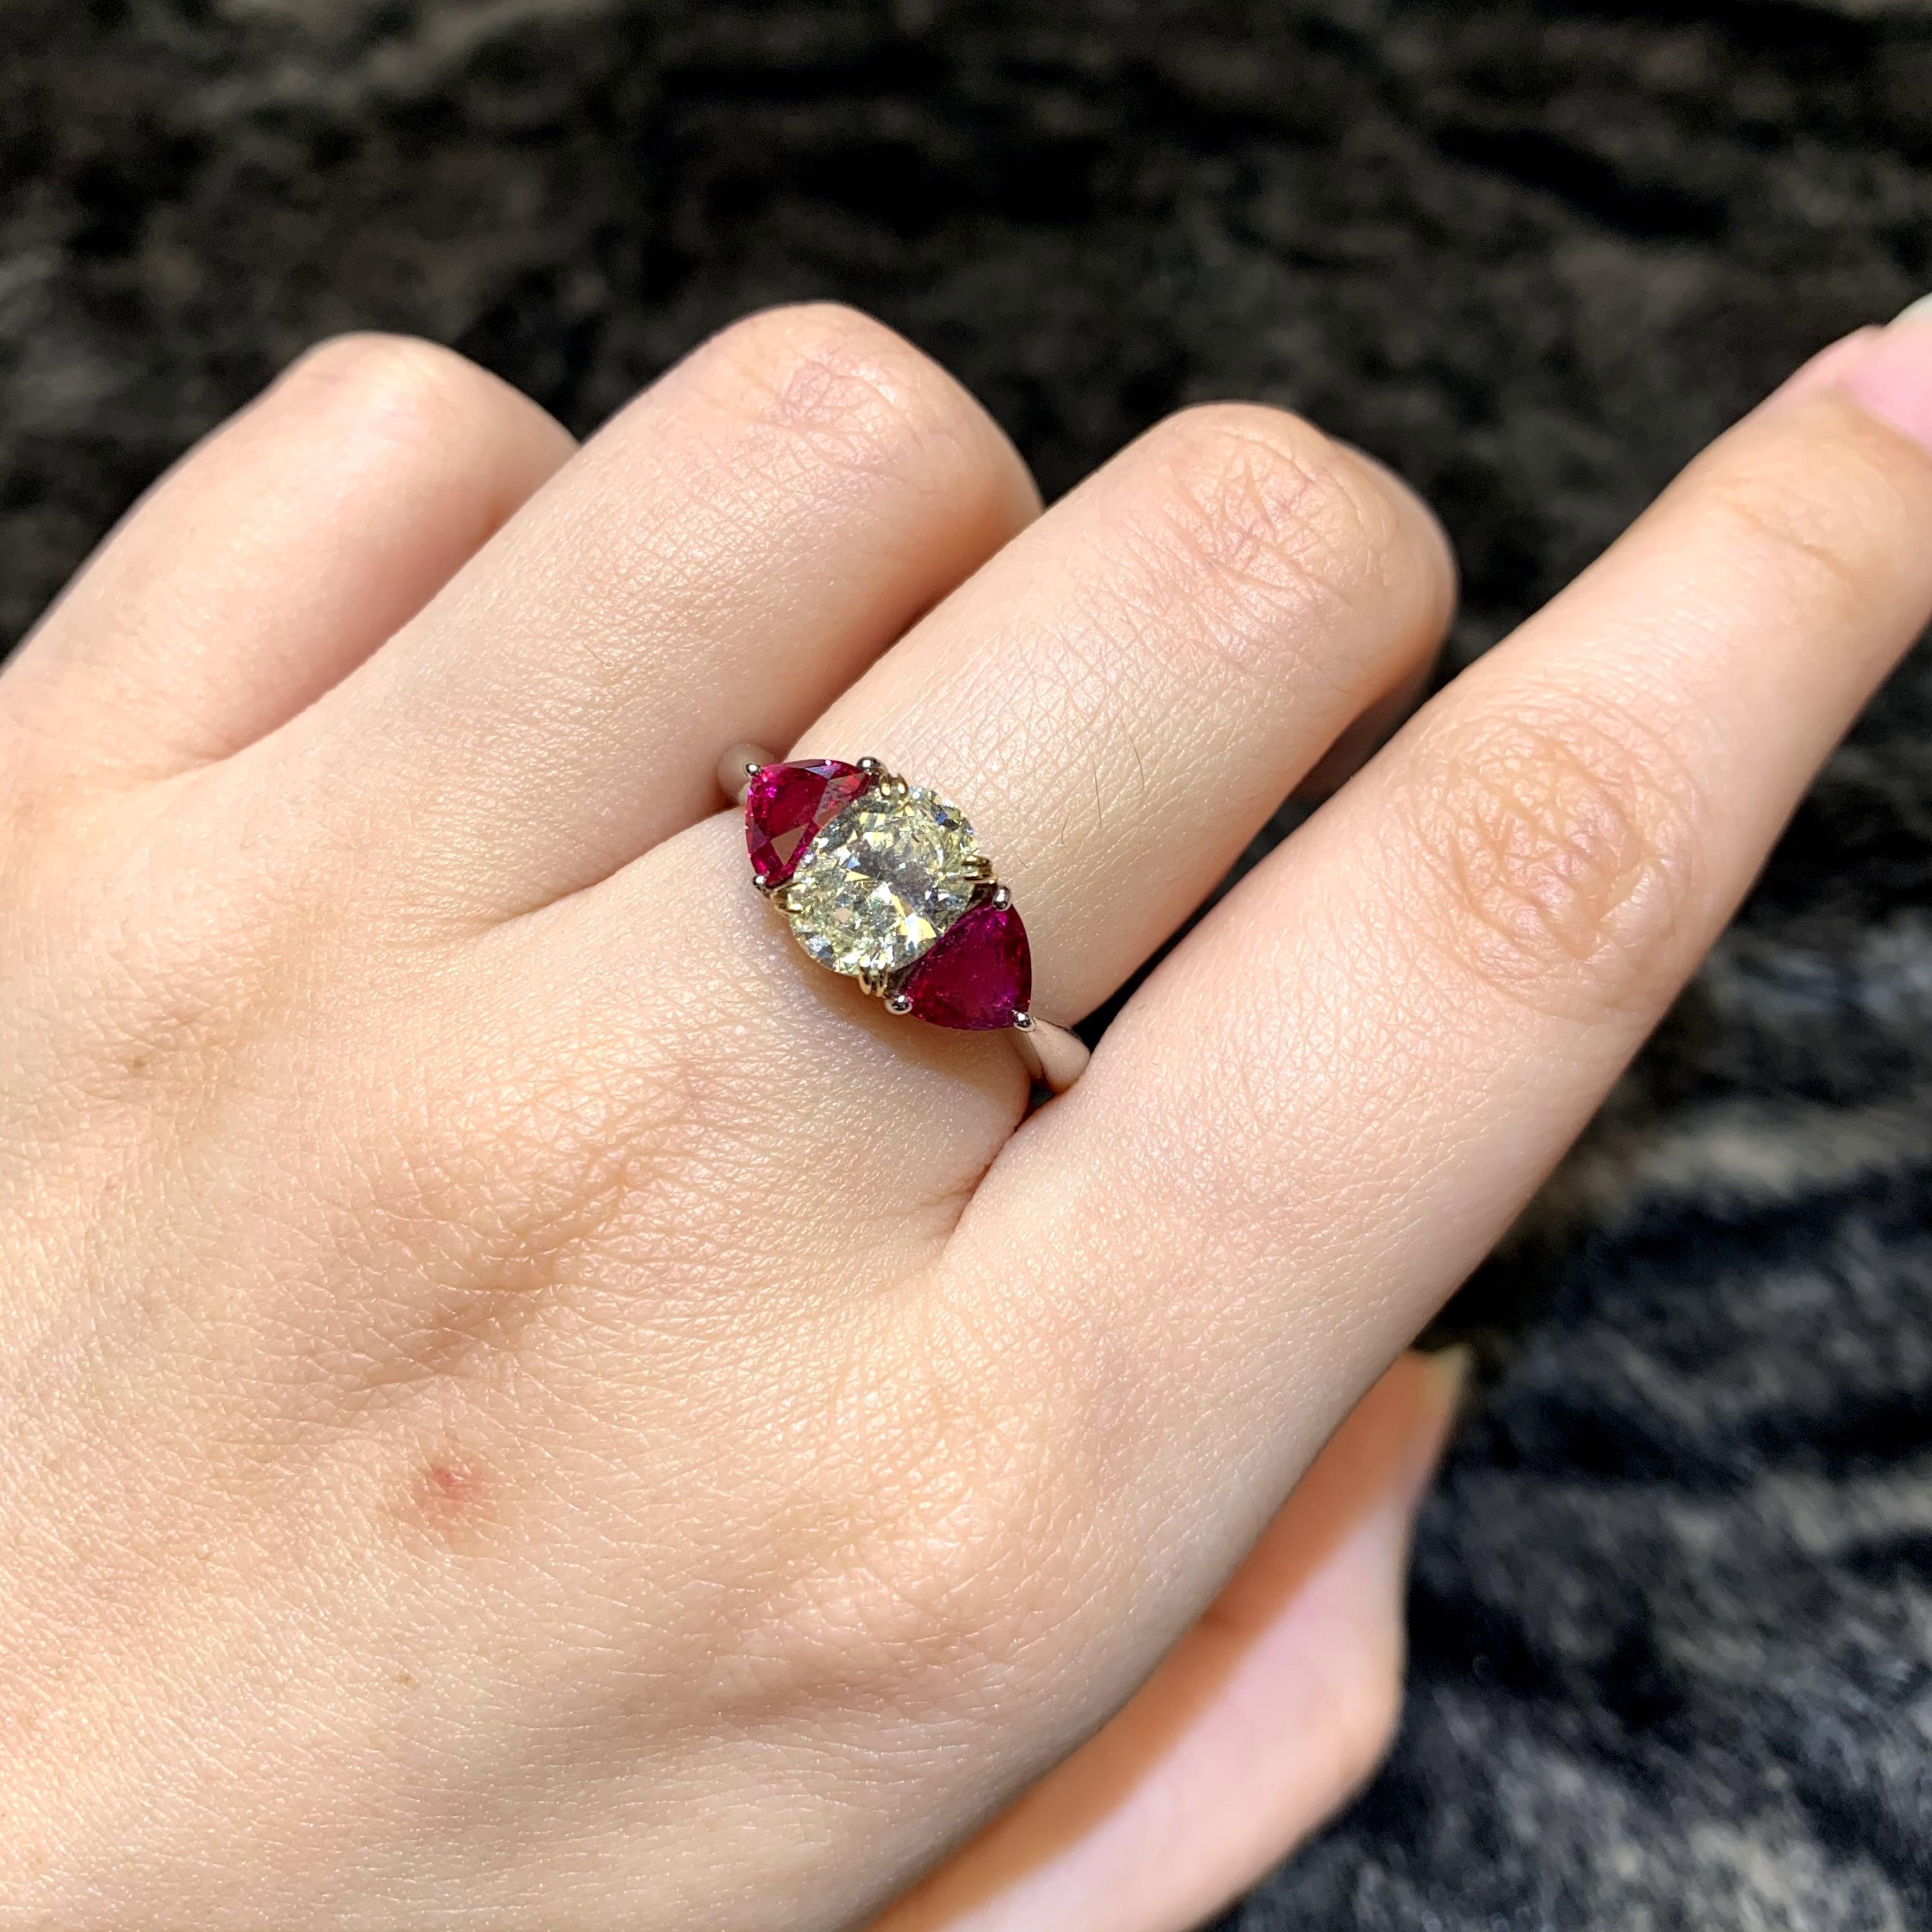 Anglo-Indian CGL & GRJ Japan Lab Certified Diamond and Ruby Solitare Ring